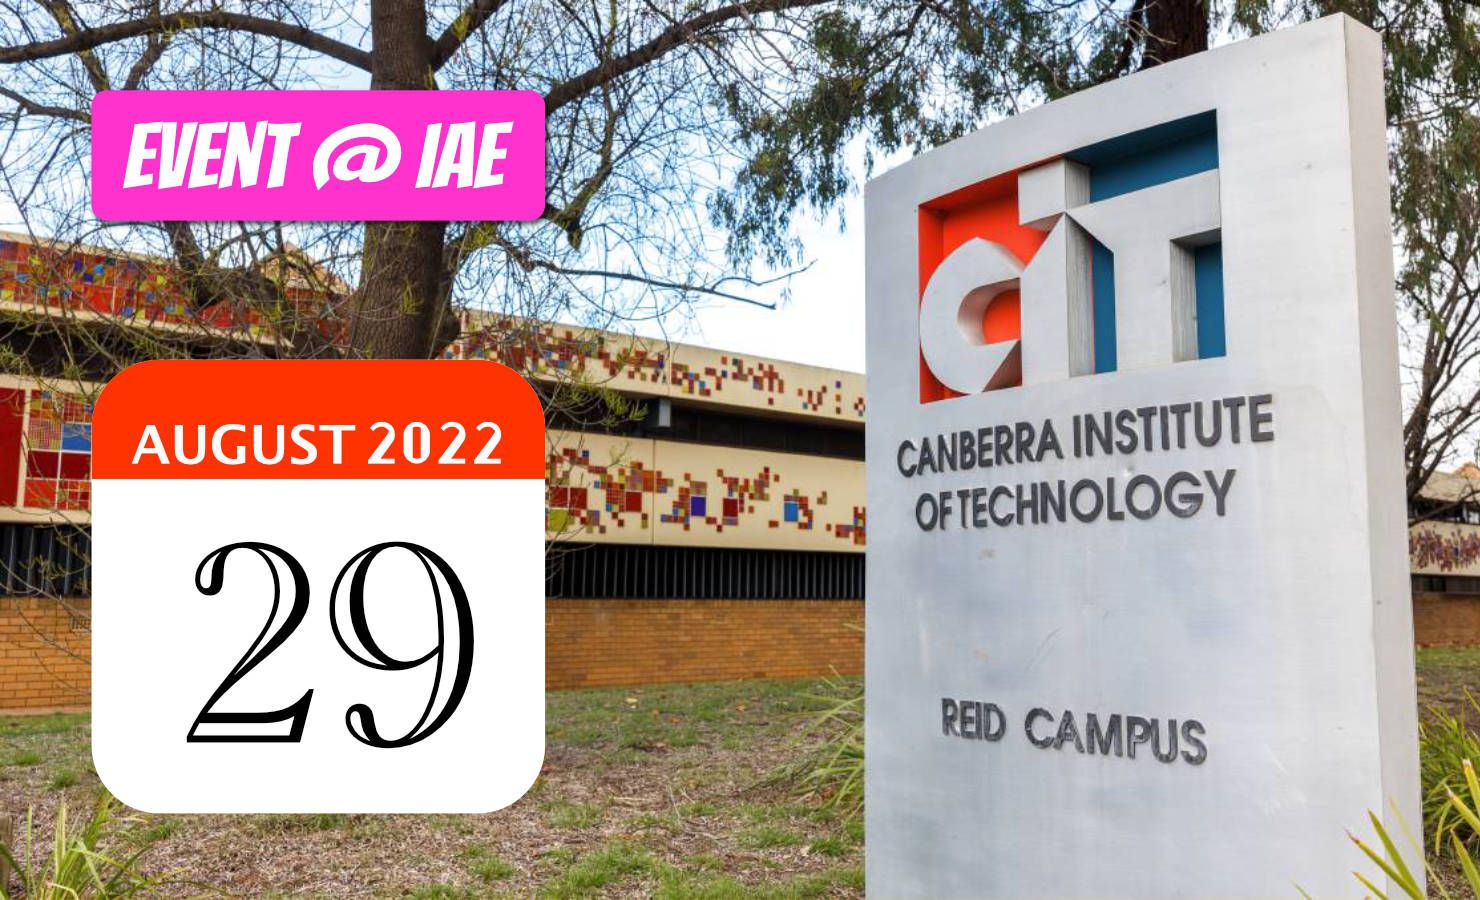 Canberra Institute of Technology (CIT) at iae Global Nepal - All students welcome!